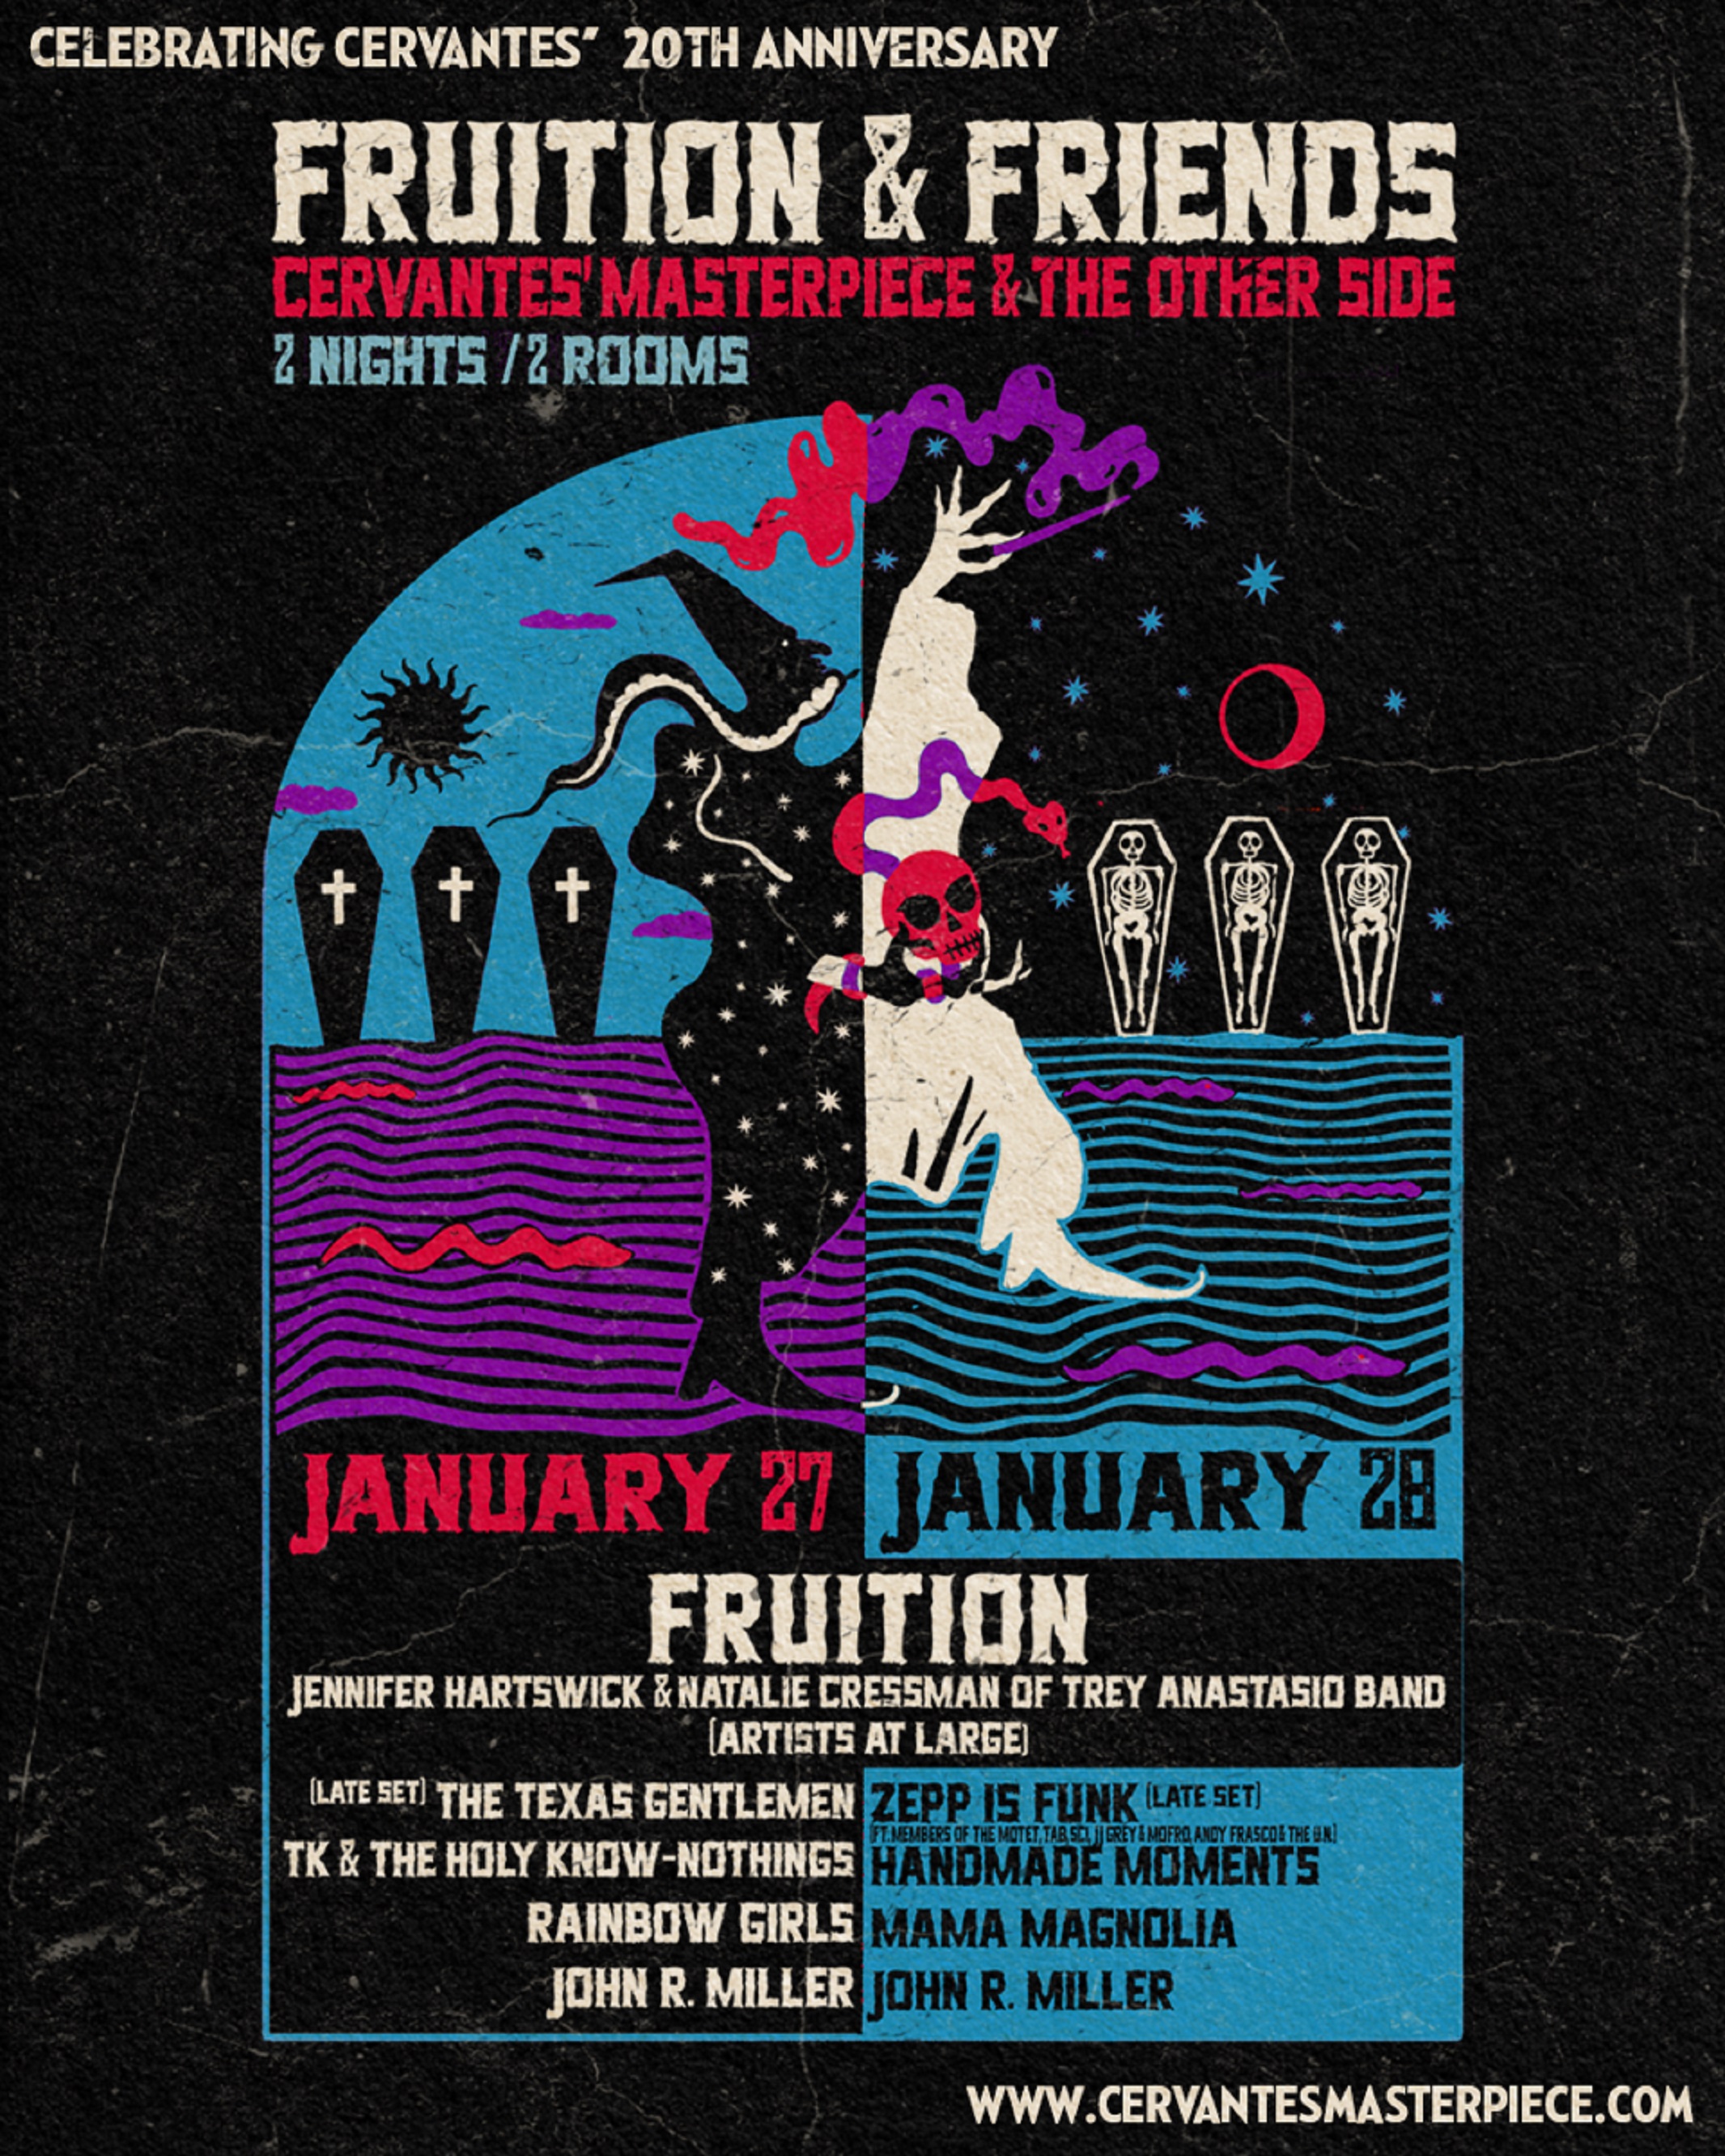 Fruition Announce 2 Night run in Denver, Vinyl release of classic "Just One Of Them Nights" album